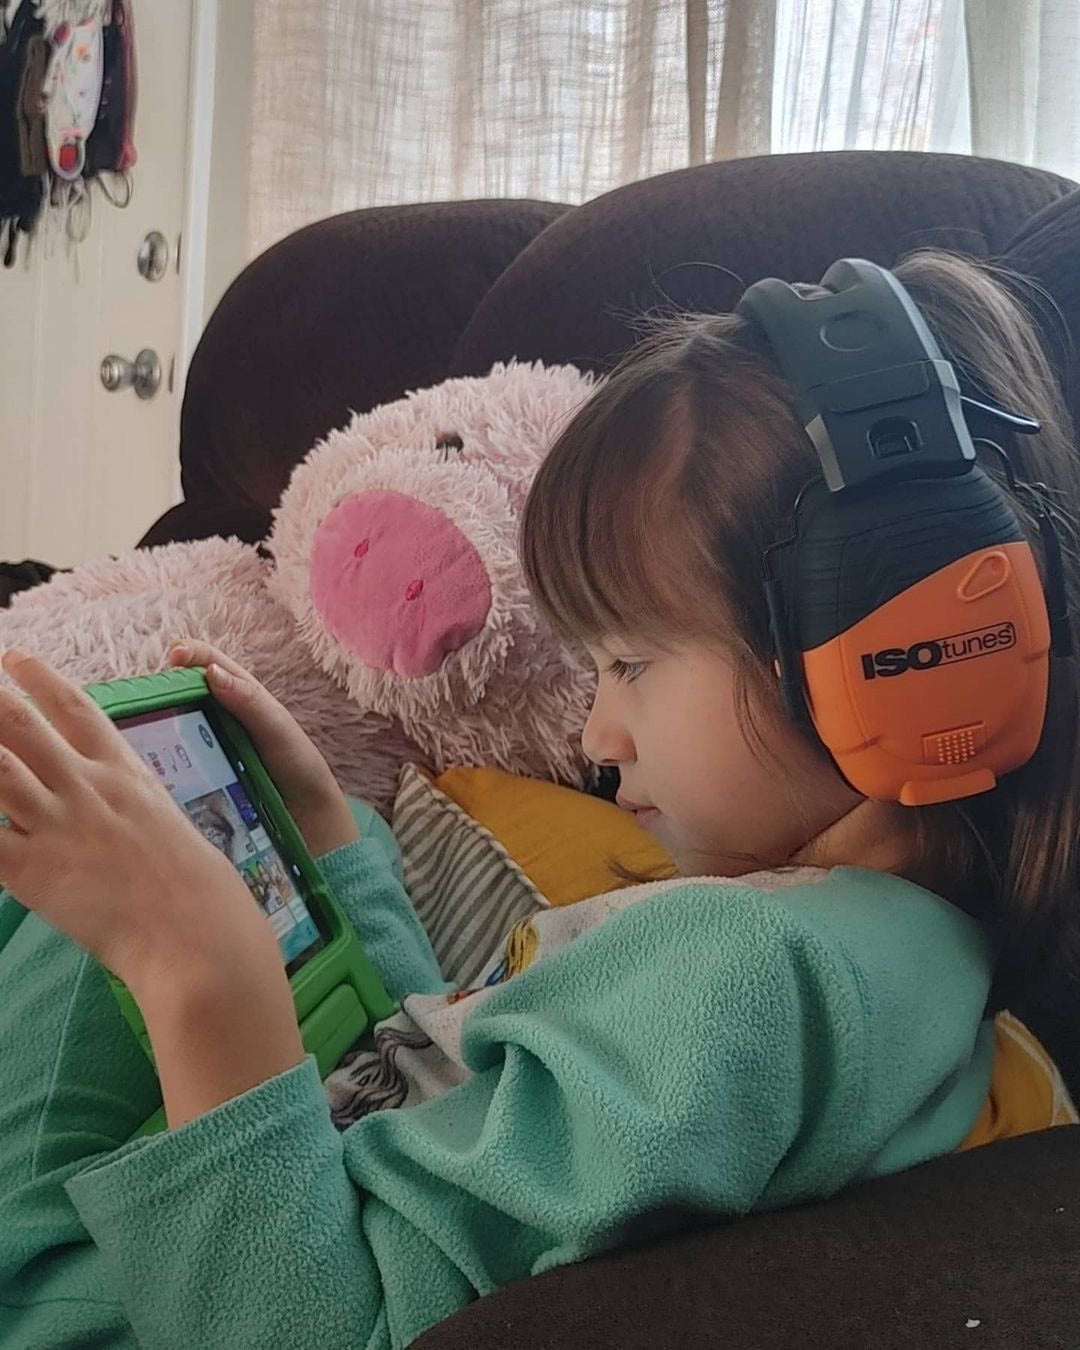 Untold Stories: How One Girl Manages Autism and Sensory Overload with ISOtunes Headphones